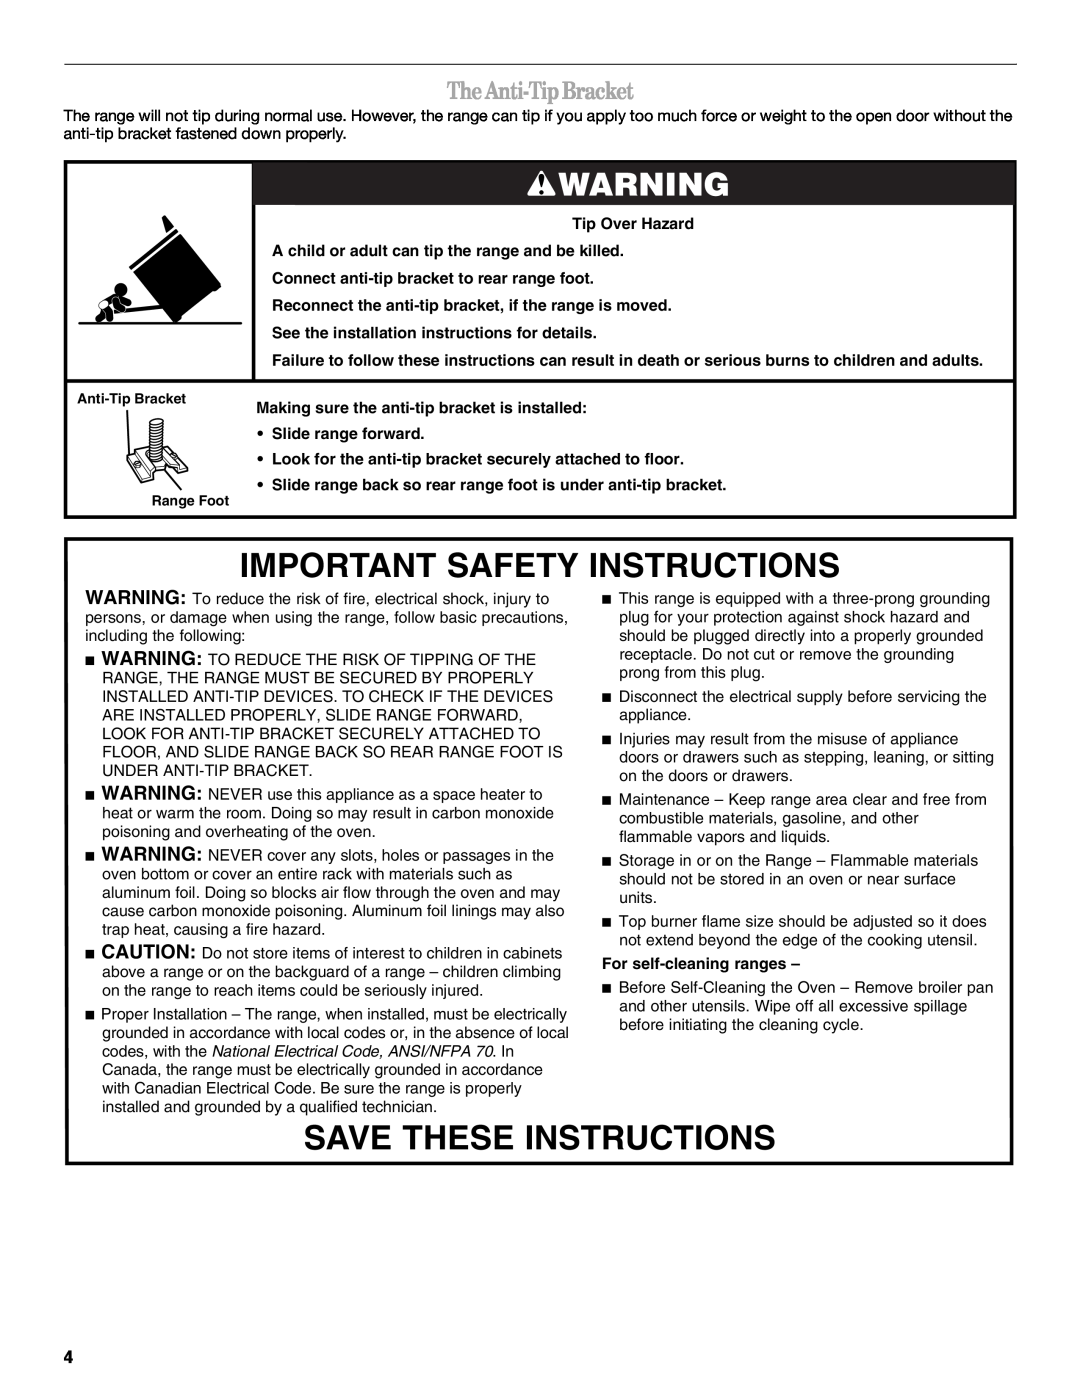 Whirlpool W10086240 Important Safety Instructions, Save These Instructions, The Anti-Tip Bracket, For self-cleaning ranges 